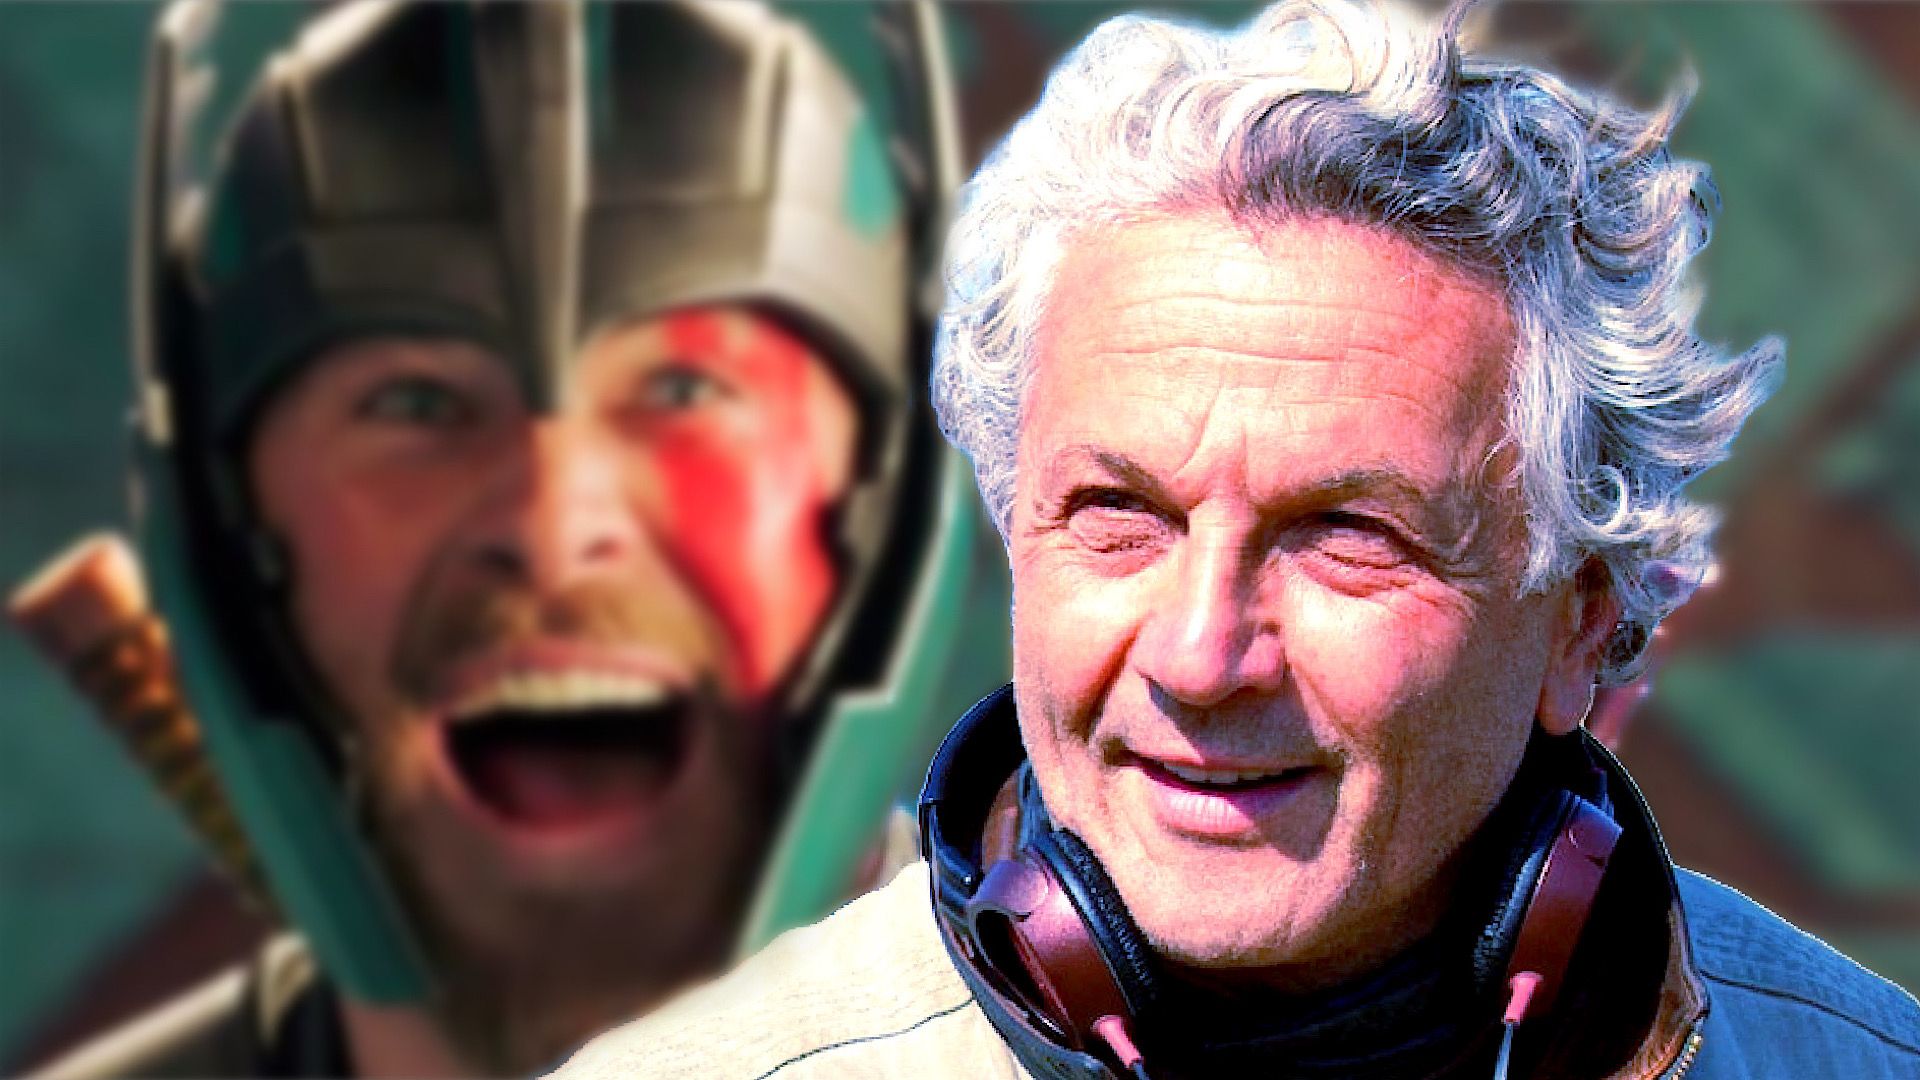 George Miller with headphones and Chris Hemsworth as Thor laughing